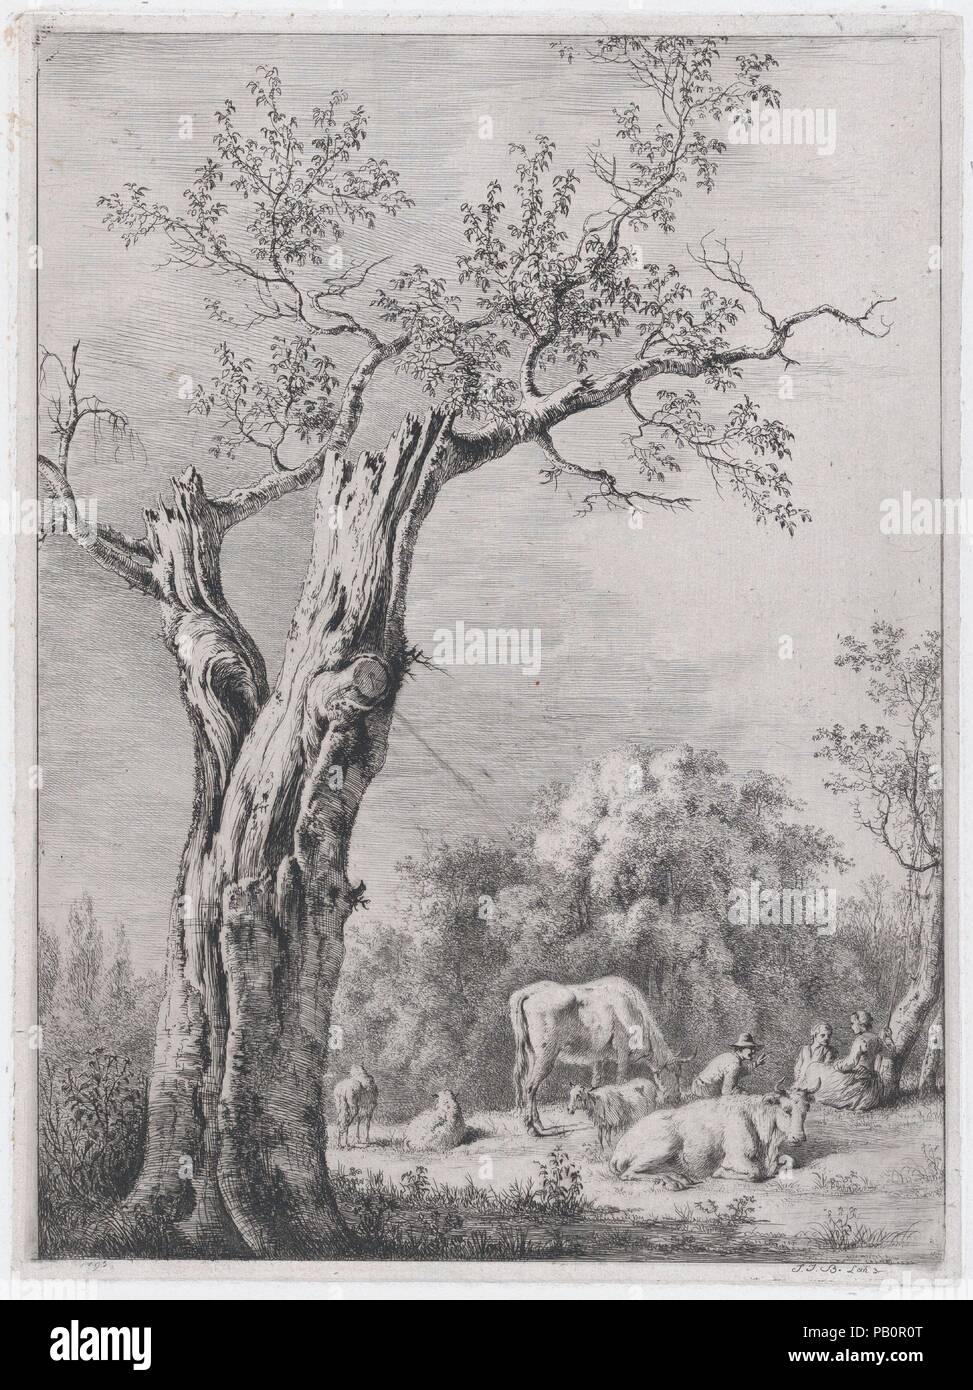 Spring, after a Drawing Made at Saint-Chamond. Artist: Jean Jacques de Boissieu (French, Lyons 1736-1810 Lyons). Dimensions: Sheet: 16 1/16 × 10 3/4 in. (40.8 × 27.4 cm)  Plate: 10 9/16 x 7 7/8 in. (26.8 x 20 cm). Date: 1795. Museum: Metropolitan Museum of Art, New York, USA. Stock Photo